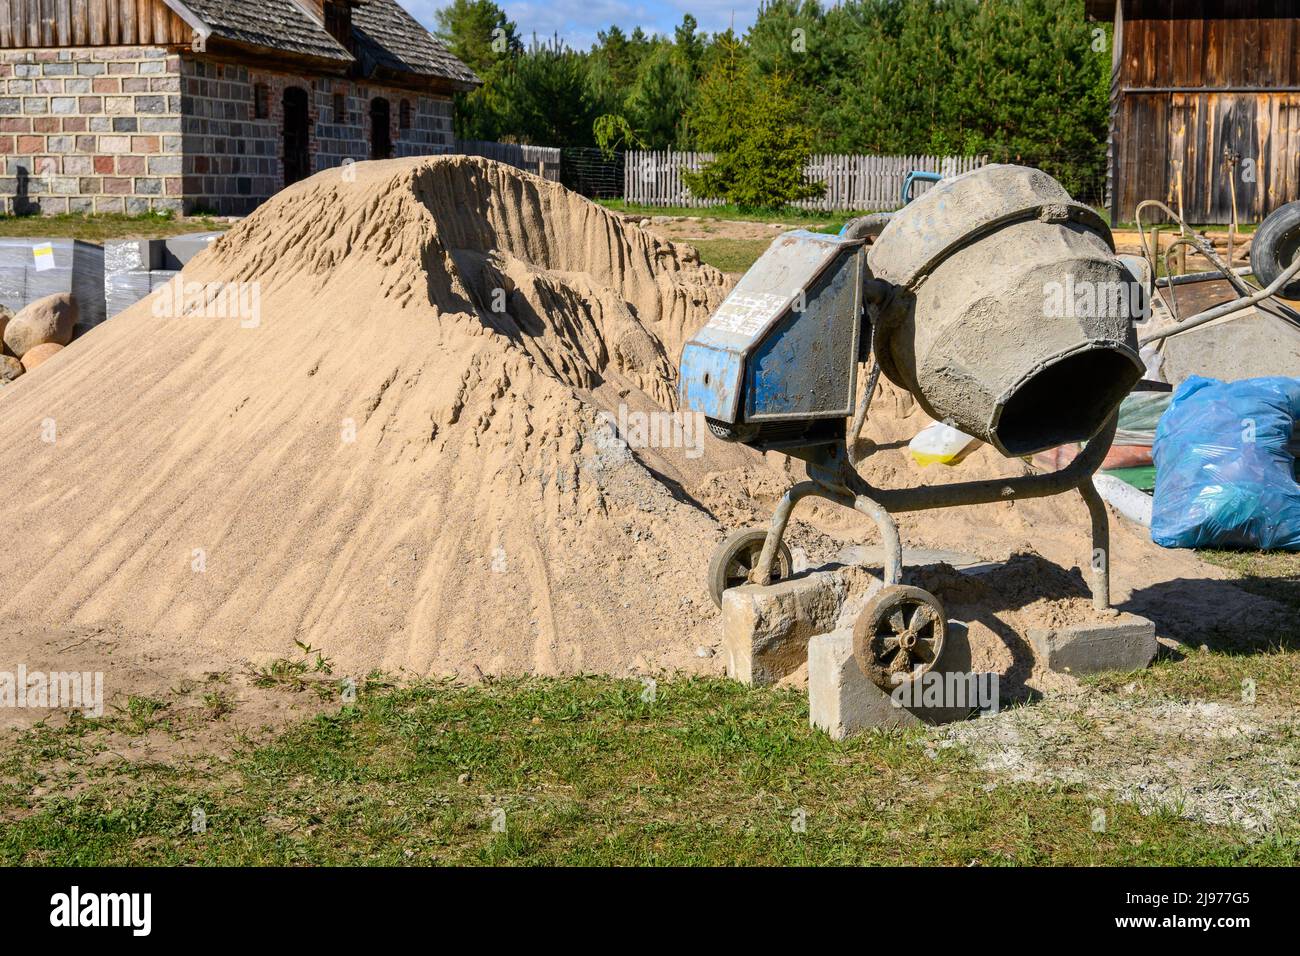 Cement Mix Concrete is Compacted Sand Stock Image - Image of blend, labour:  70657963